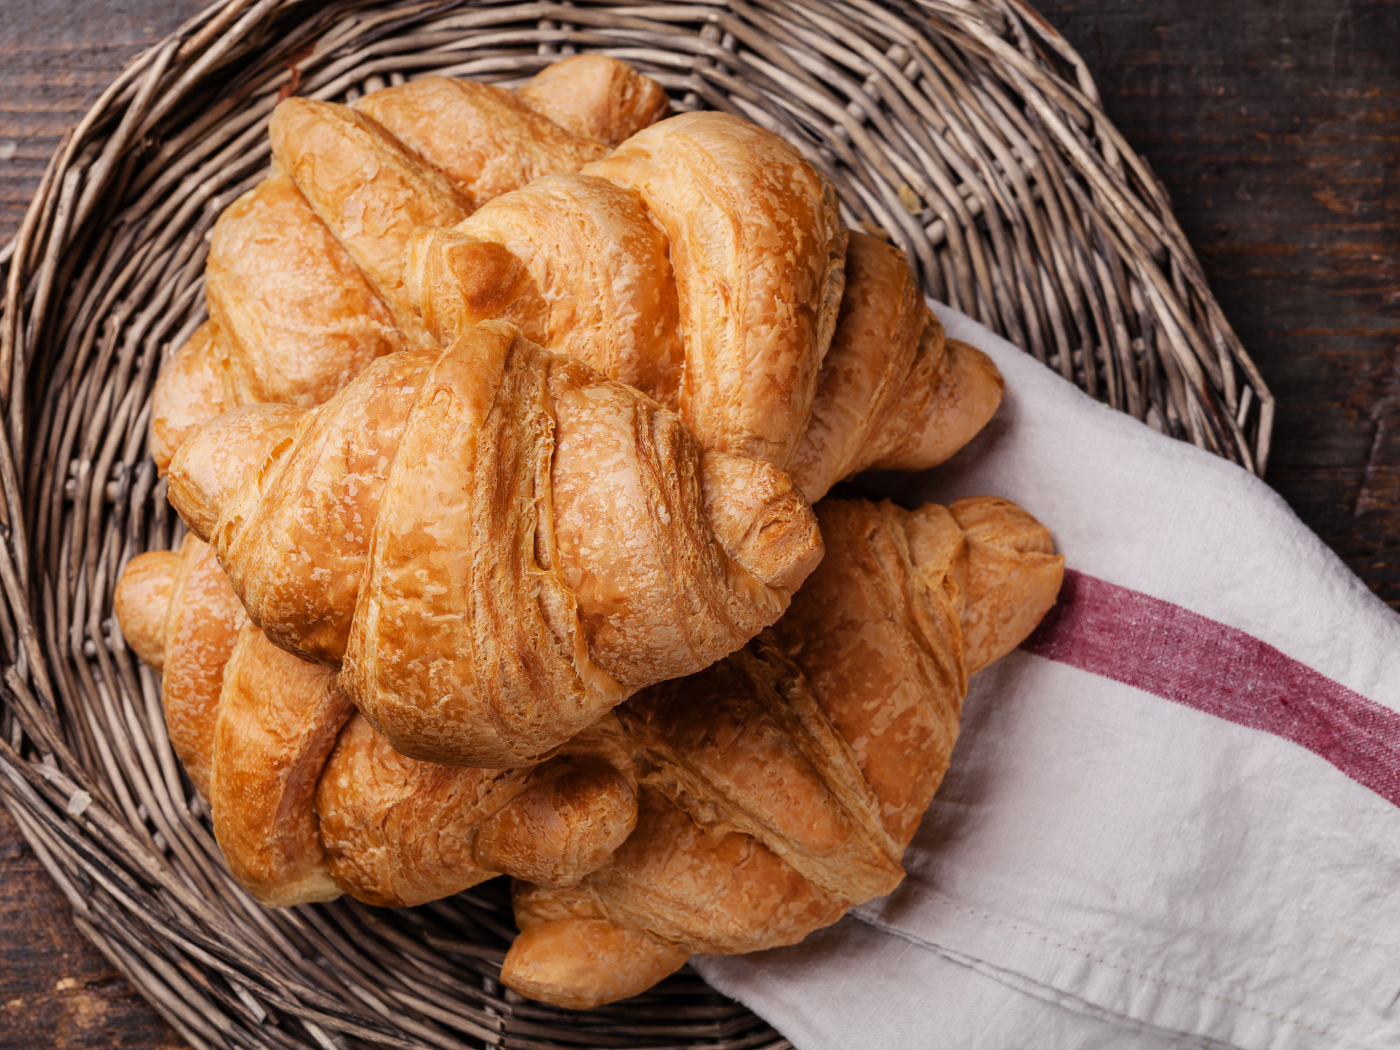 Fresh croissants in a wicker basket with a towel